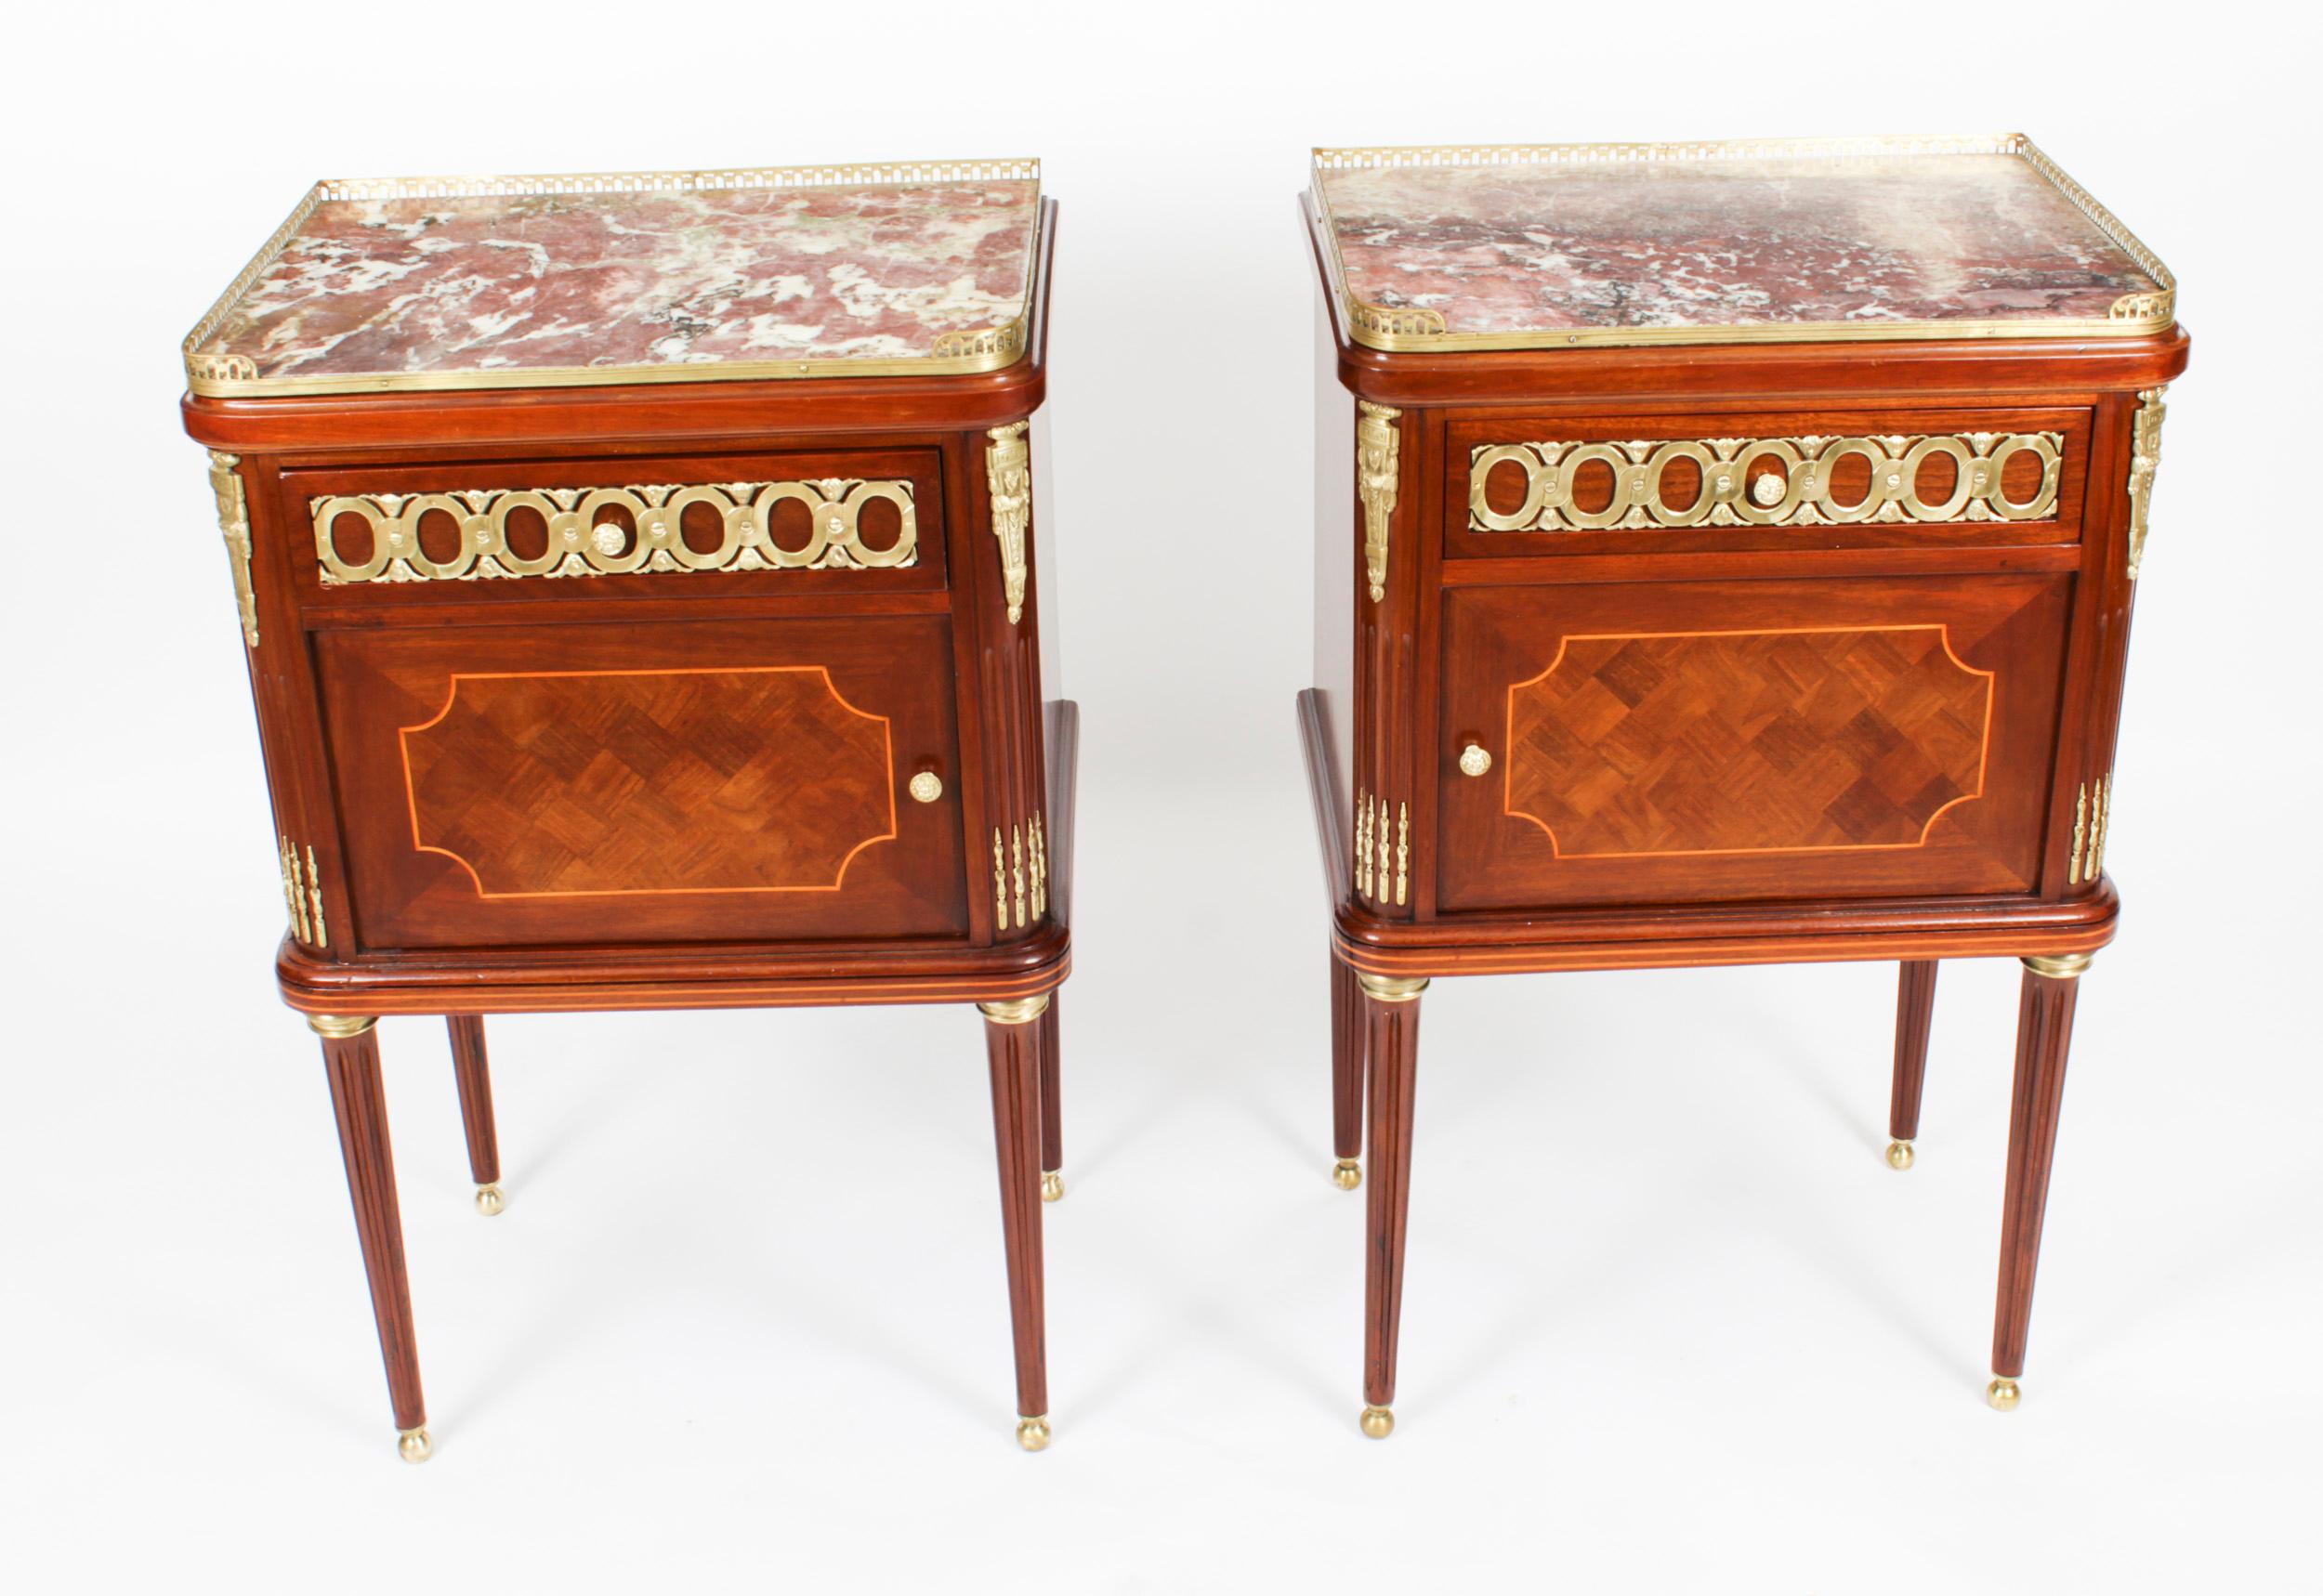 A thoroughly delightful pair of antique French ormolu mounted walnut and parquetry bedside cabinets, circa 1880 in date.
 
They each feature rectangular mottled Rouge de Rance marble tops with three quarter brass galleries above oak lined drawers,